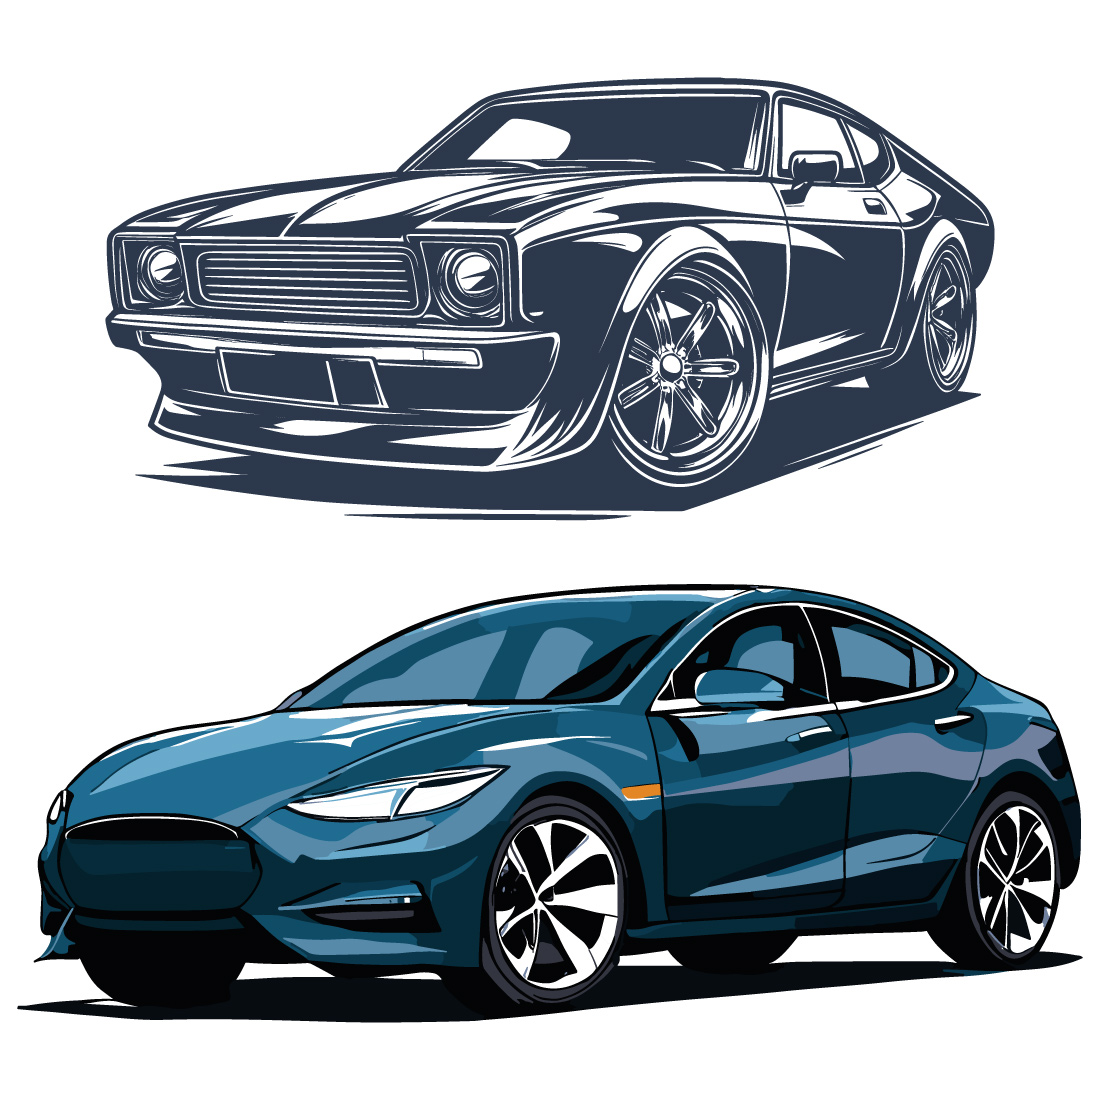 Illustration of sport car Mustang with two white strips preview image.